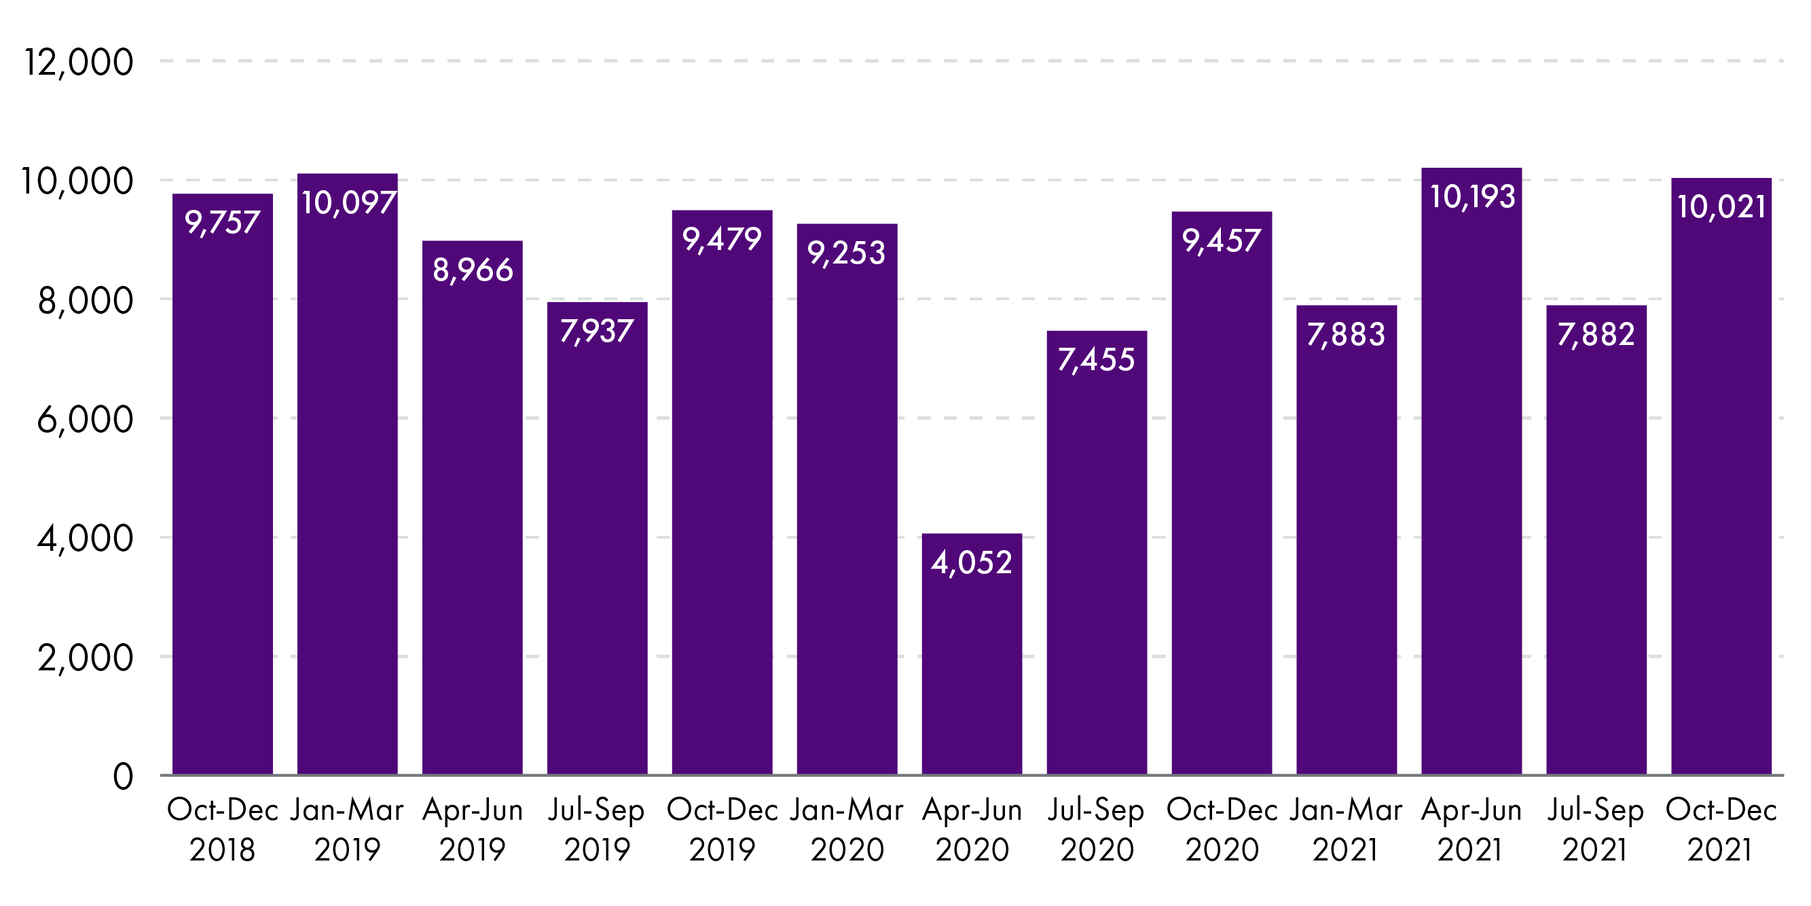 Graph showing the number of referrals received by CAMHS by quarter, from October to December 2018 to July to September 2021. Figures areprovided in the description.